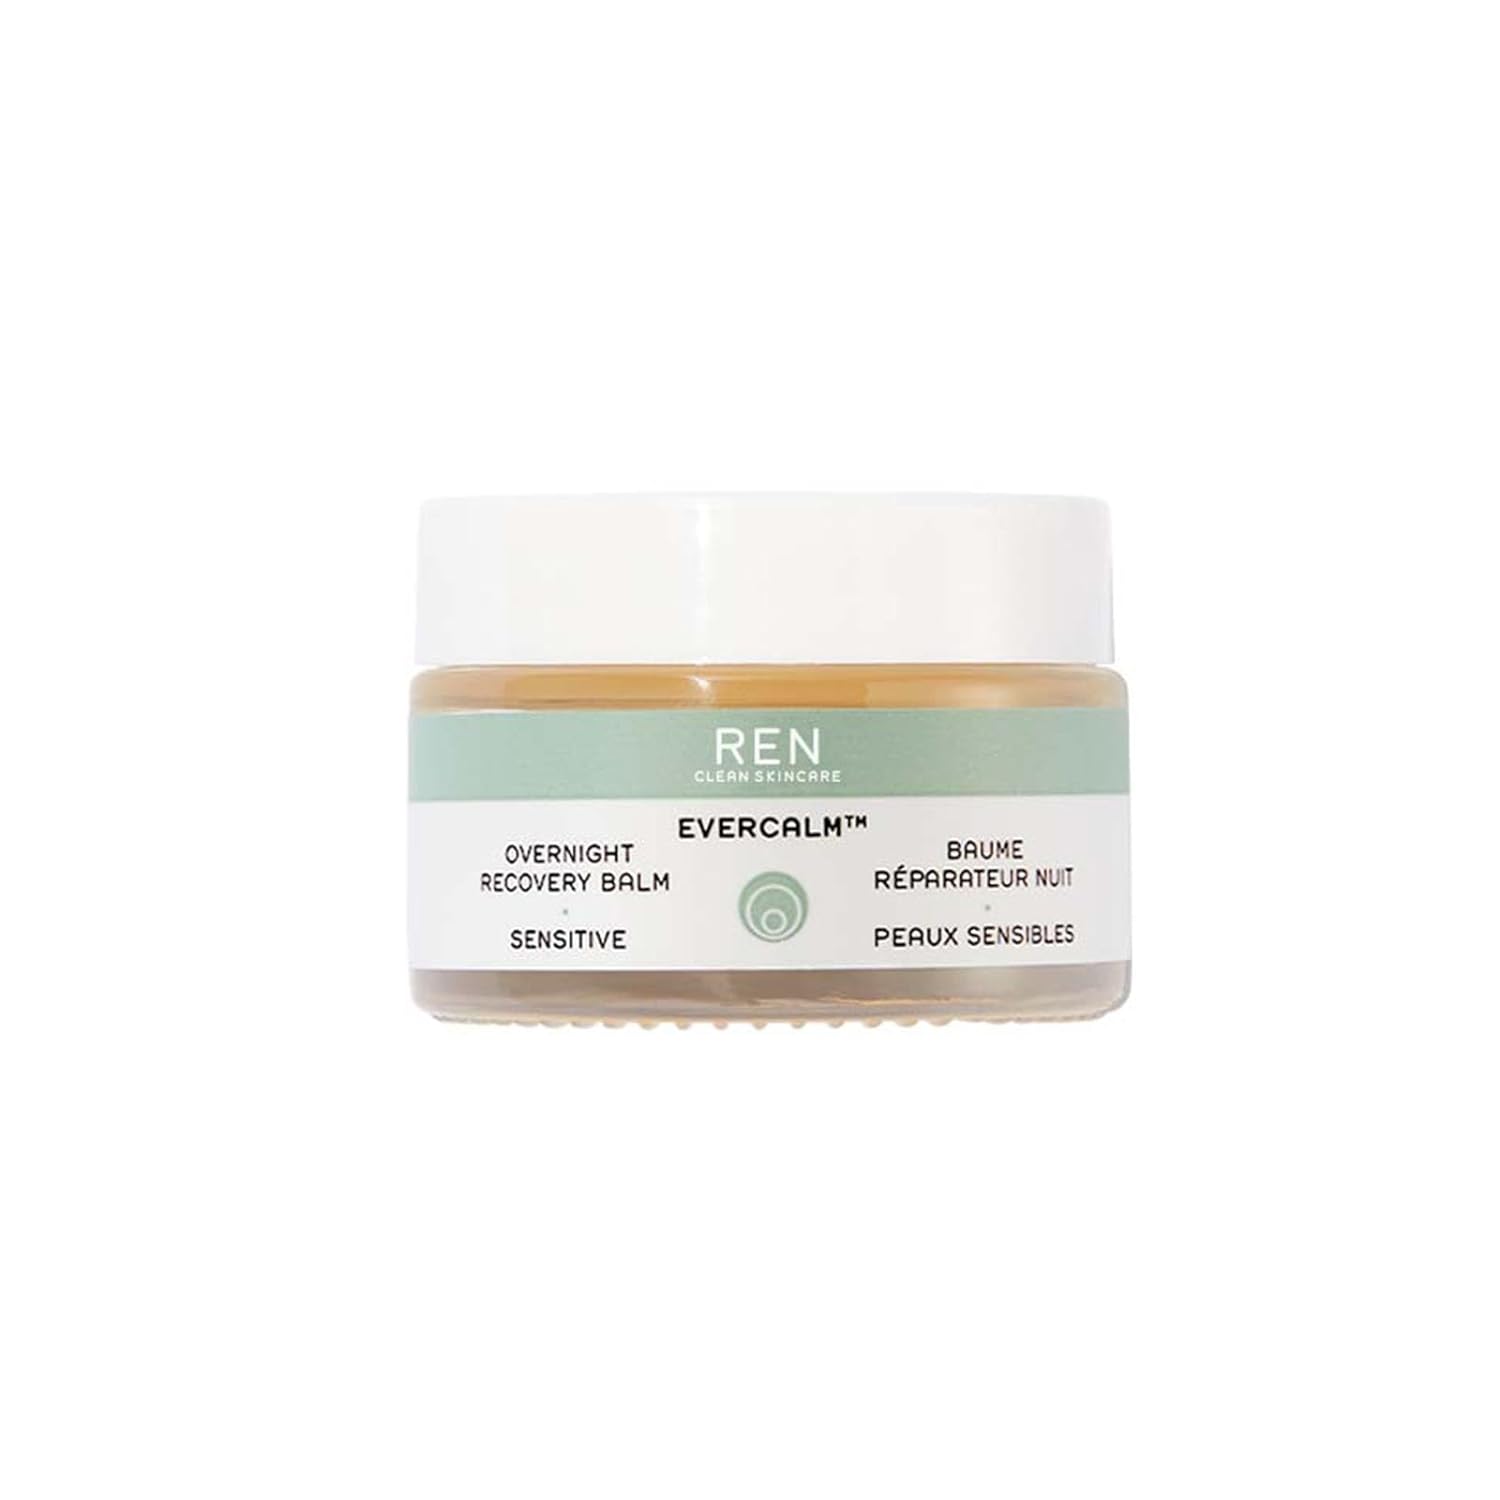 REN Clean Skincare - Evercalm™ Overnight Recovery Balm - Skin Barrier Repairing In-Sleep Face Balm for Dry, Damaged & Sensitive Skin, Cruelty-Free